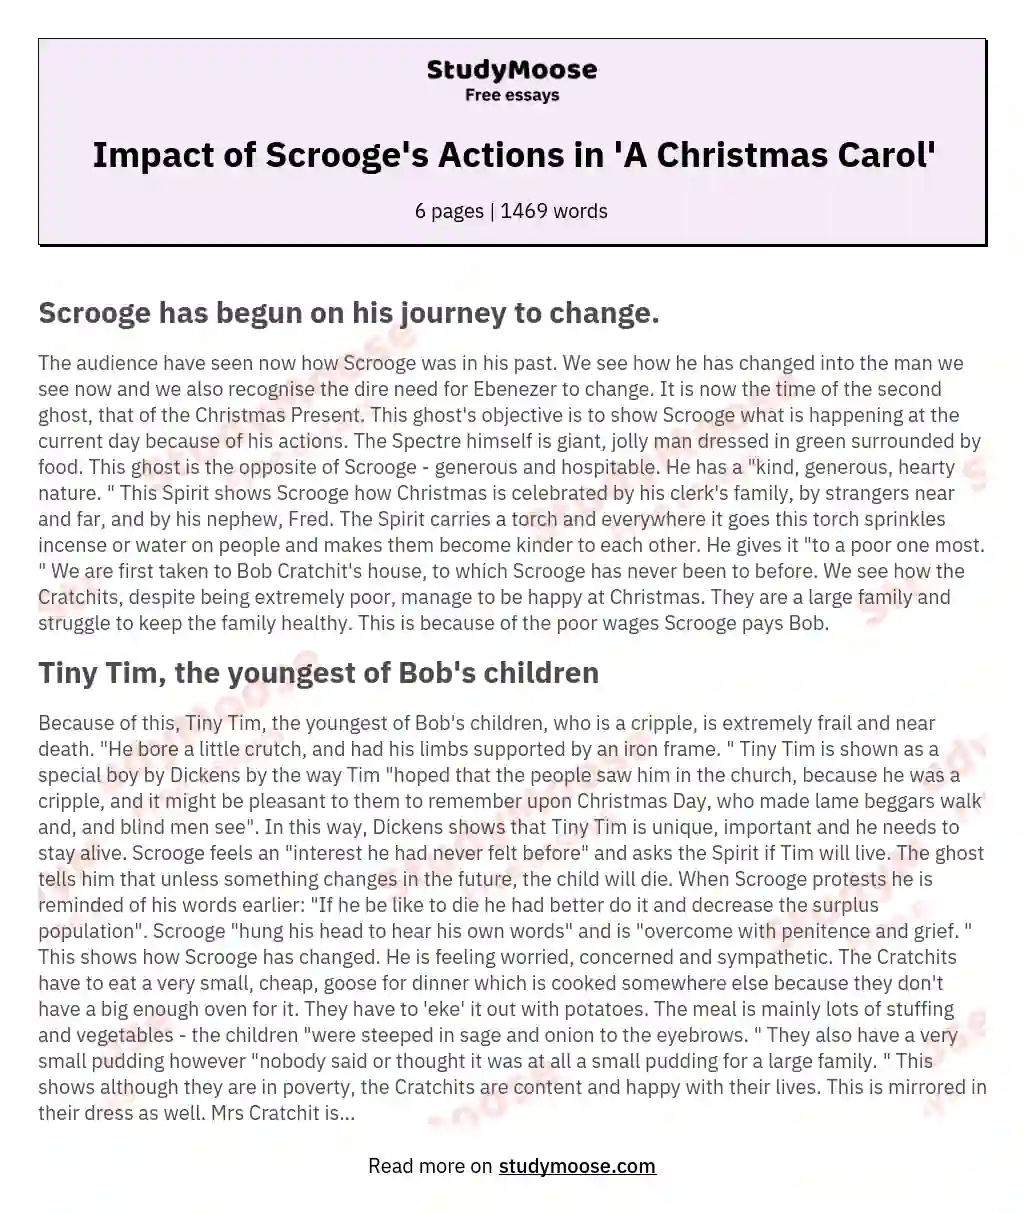 Impact of Scrooge's Actions in 'A Christmas Carol' essay